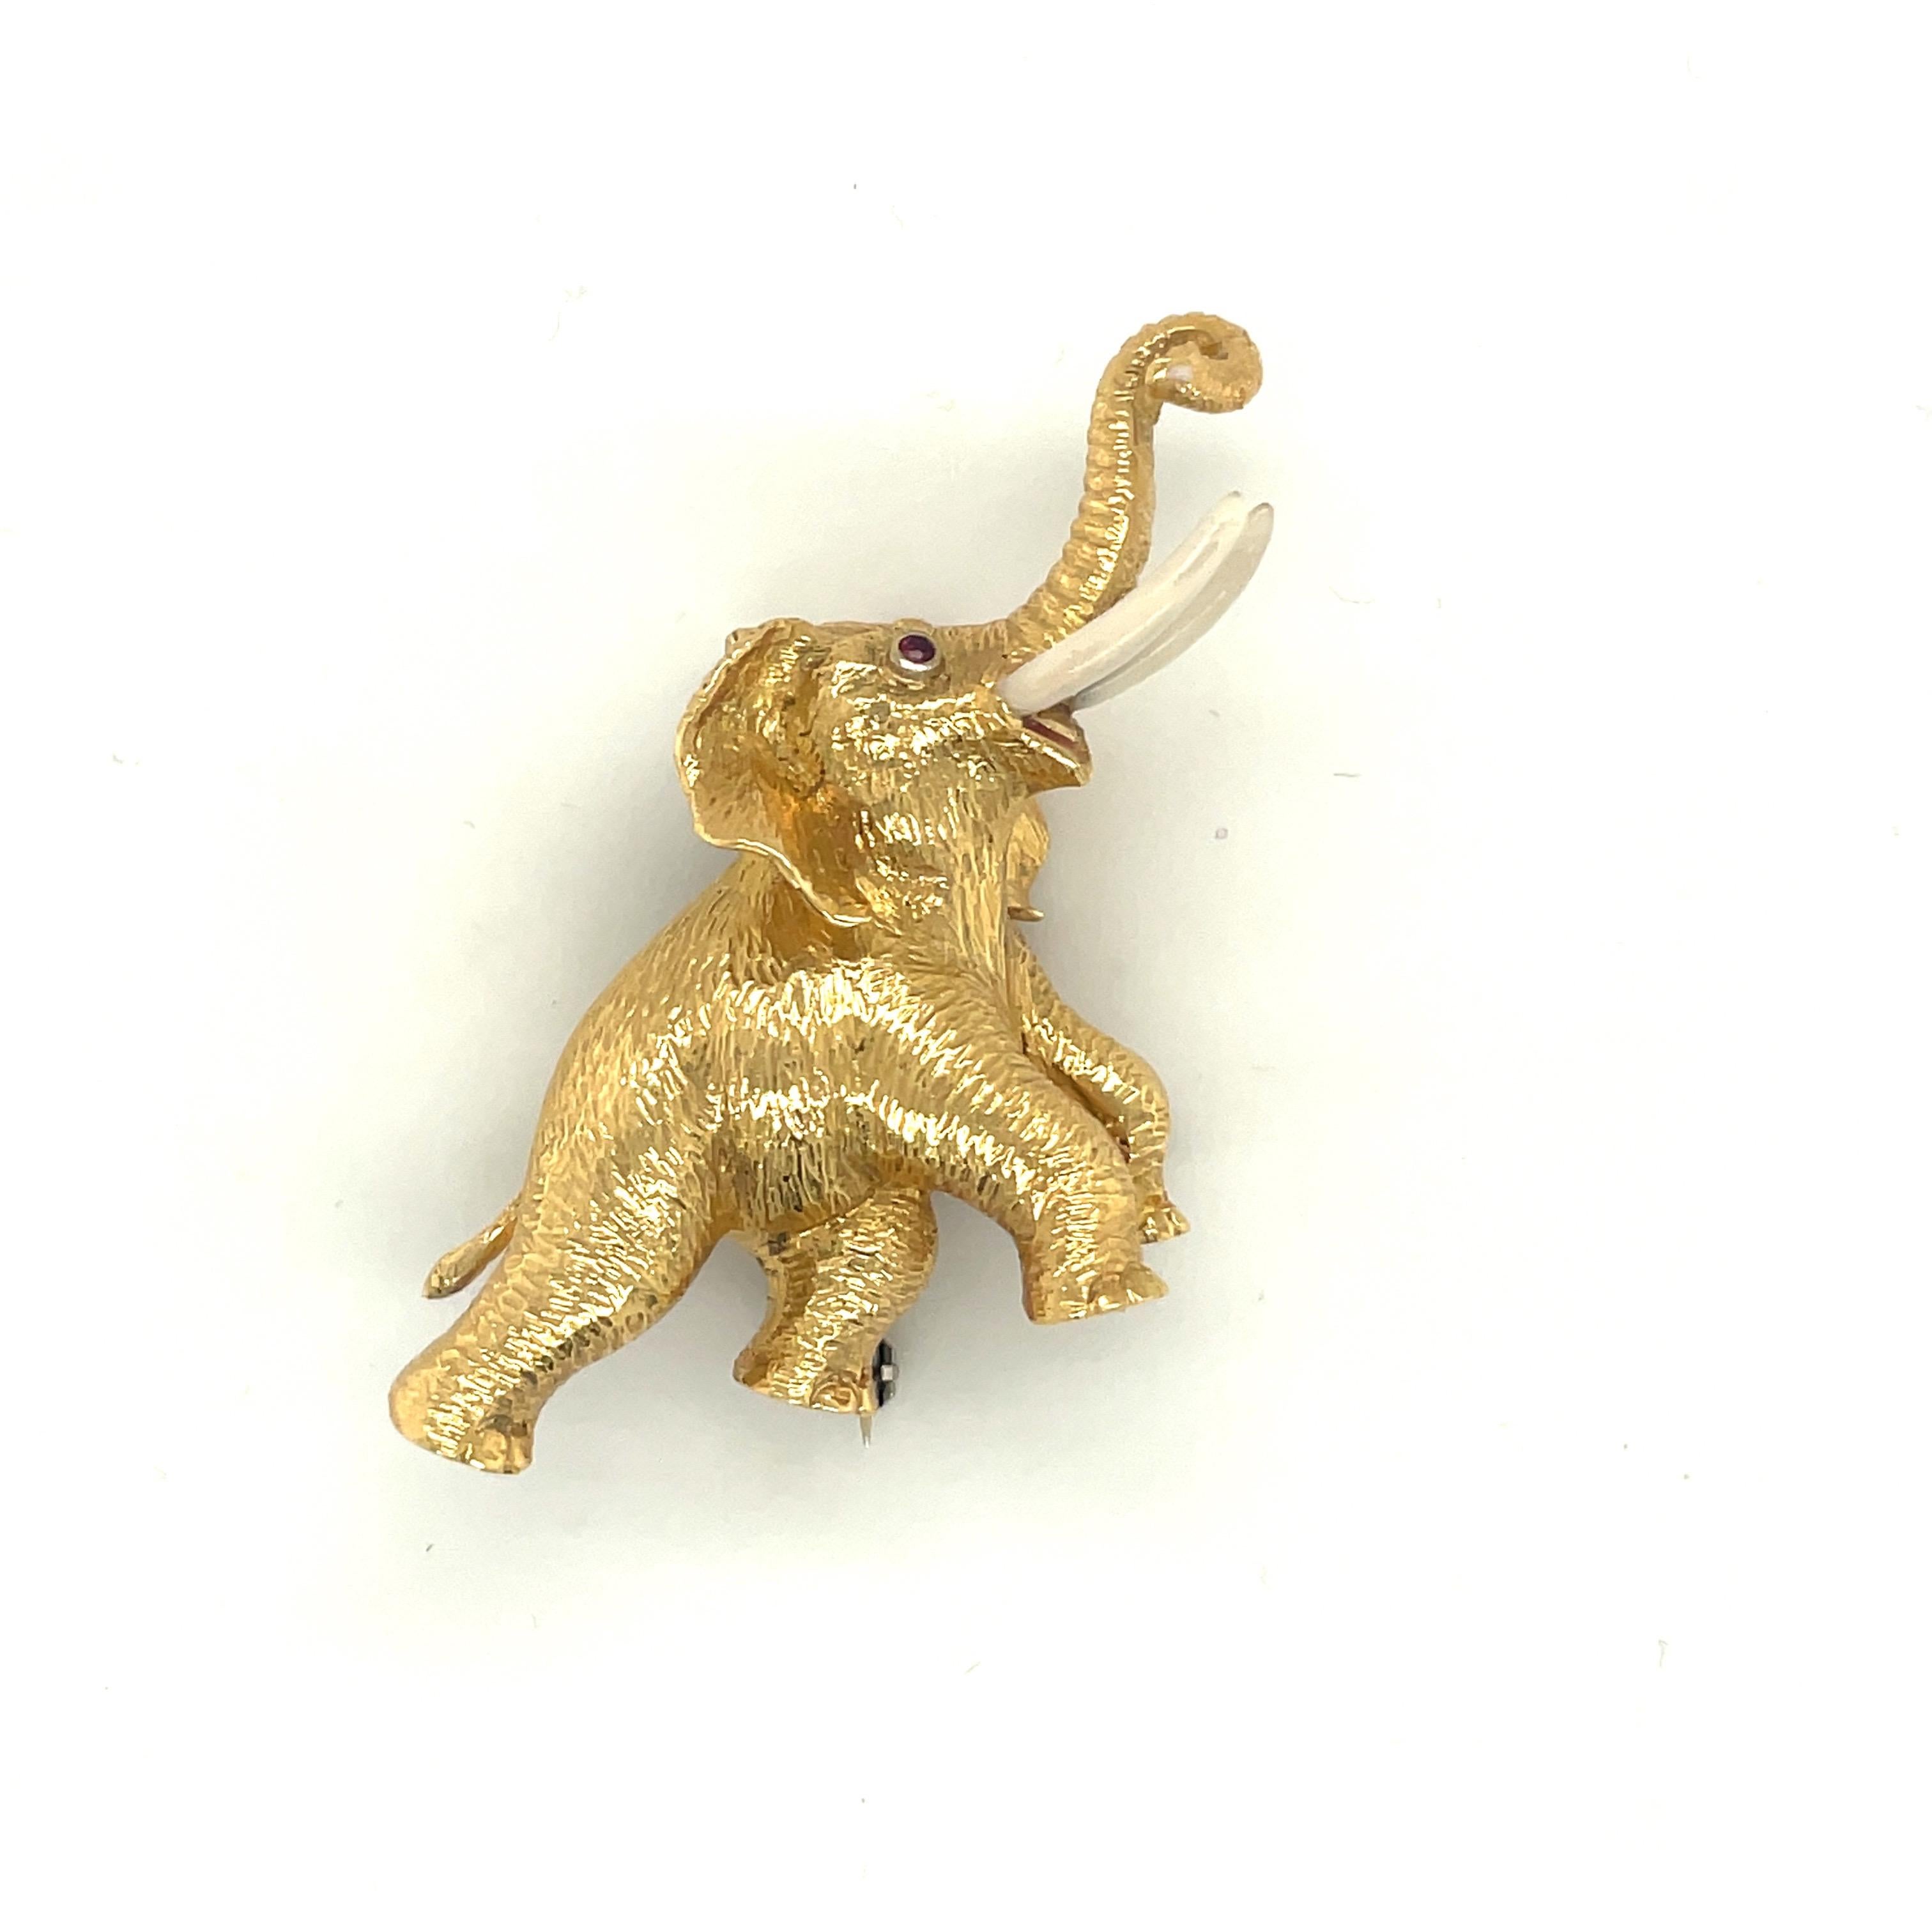 This playful elephant brooch is designed in a sandblasted 18 karat yellow gold finish. His eyes are set with  round rubies and his tusks are a white enamel .The elephant's trunk is lifted up, which represents good luck!